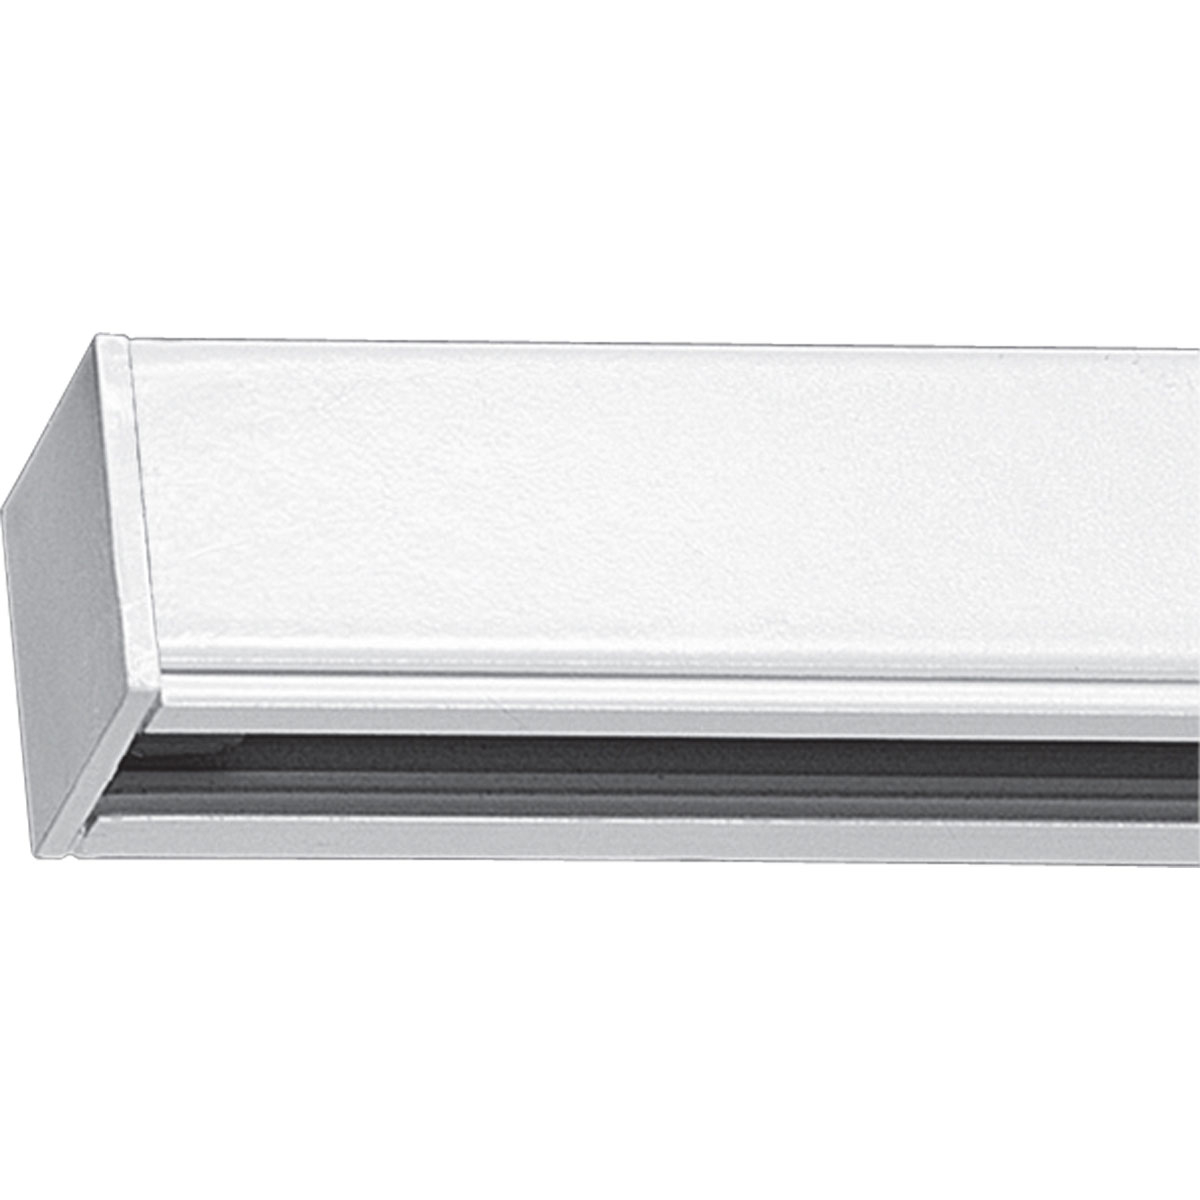 Alpha Trak sections are extruded aluminum with positive contact, can be cut. Designed for 120-volt supply with 20 amp capacity. All 12' track sections include one dead end and mounting hardware. White finish.